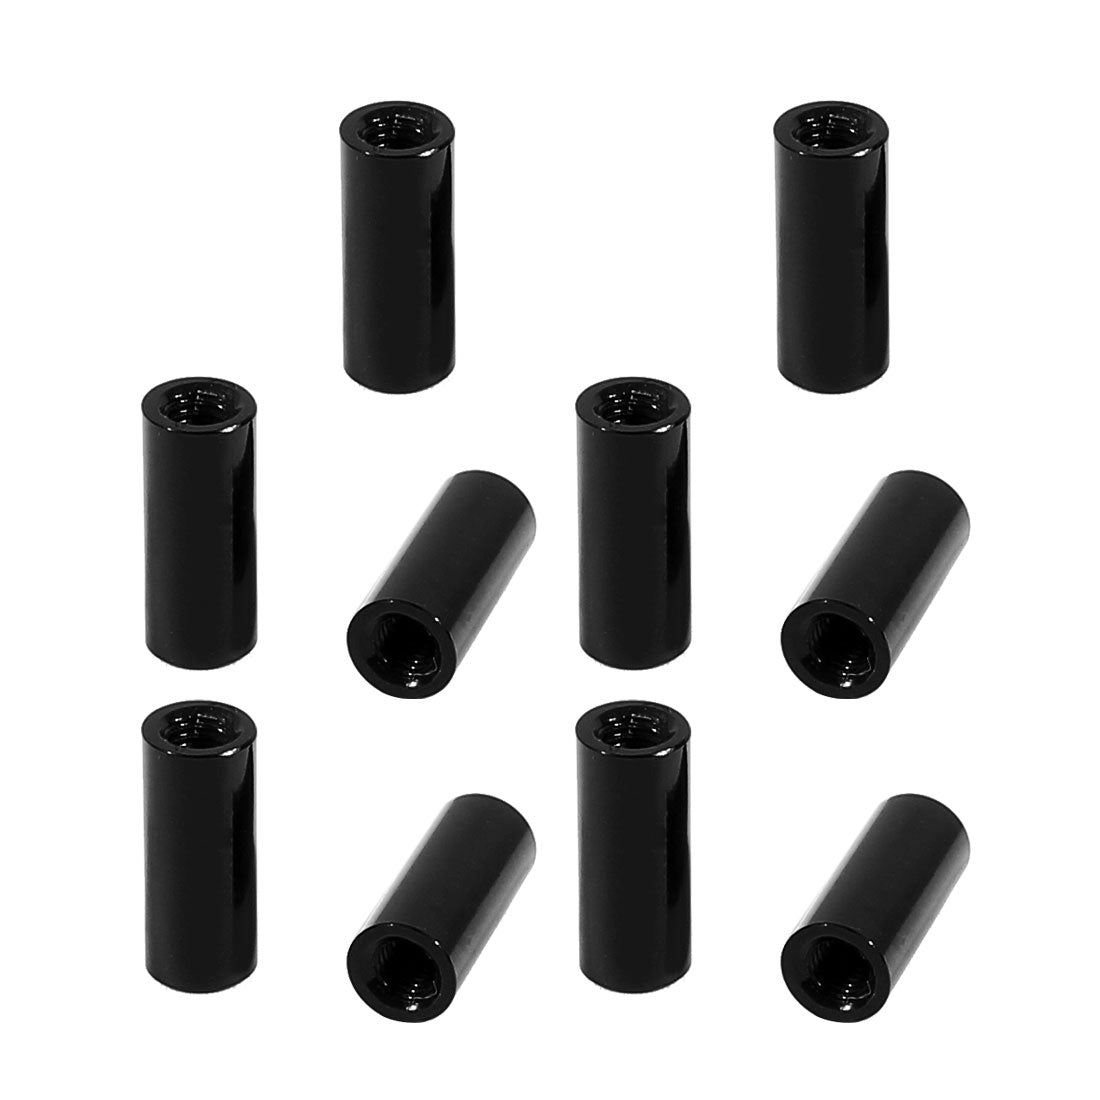 uxcell Uxcell 10Pcs M3 x 12mm Round Aluminum Column Alloy Standoff Spacer Stud Fastener for Quadcopter Black